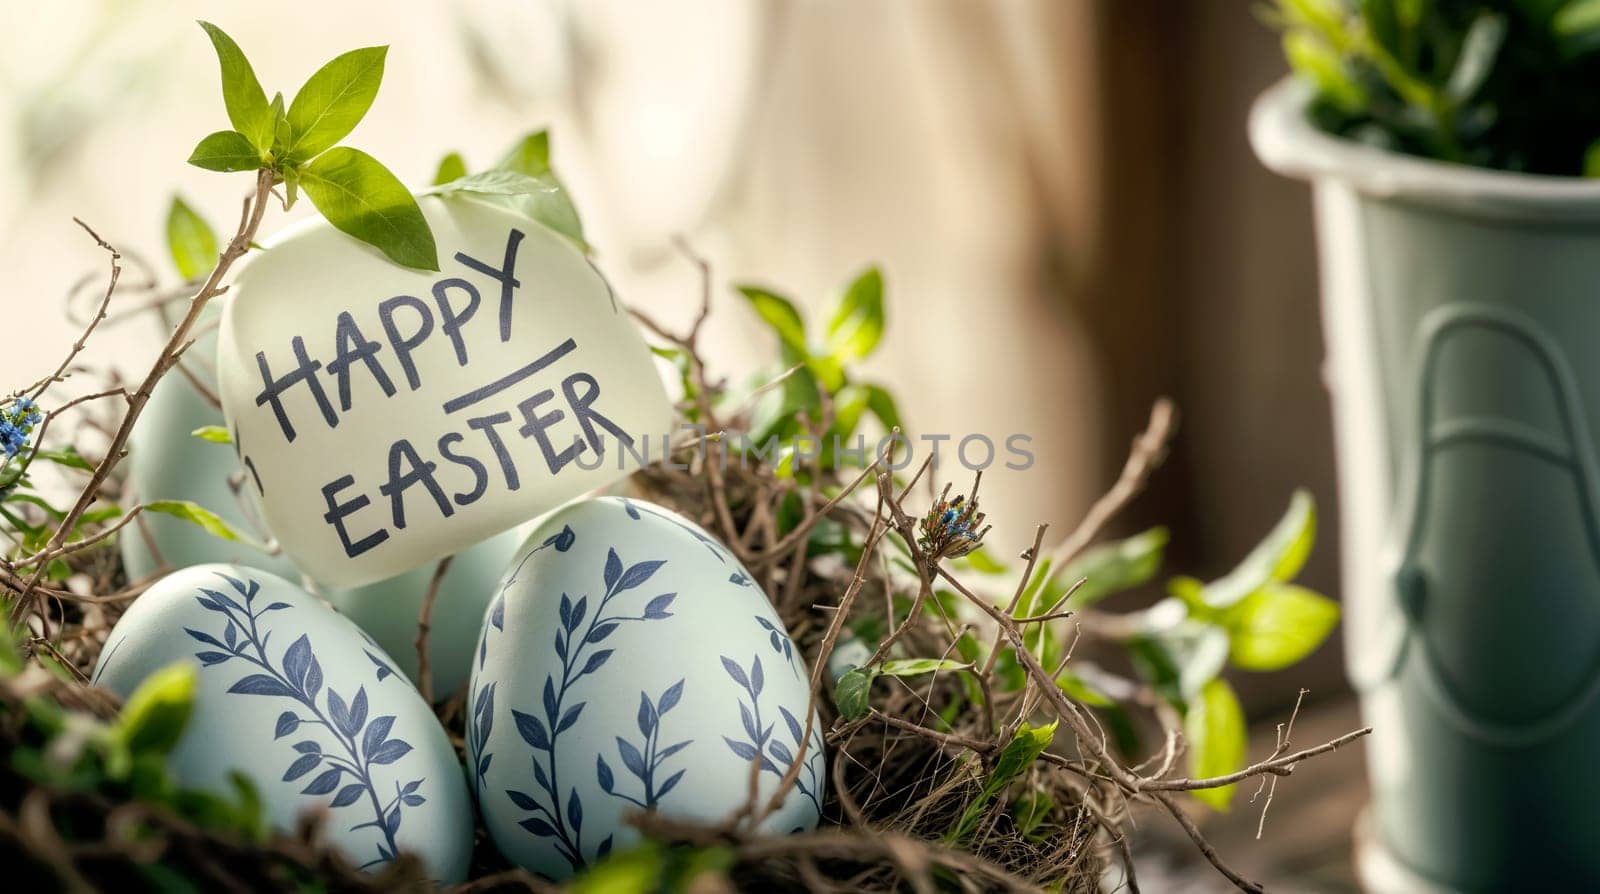 Happy Easter Greeting With Painted Eggs Nestled in a Birds Nest by chrisroll